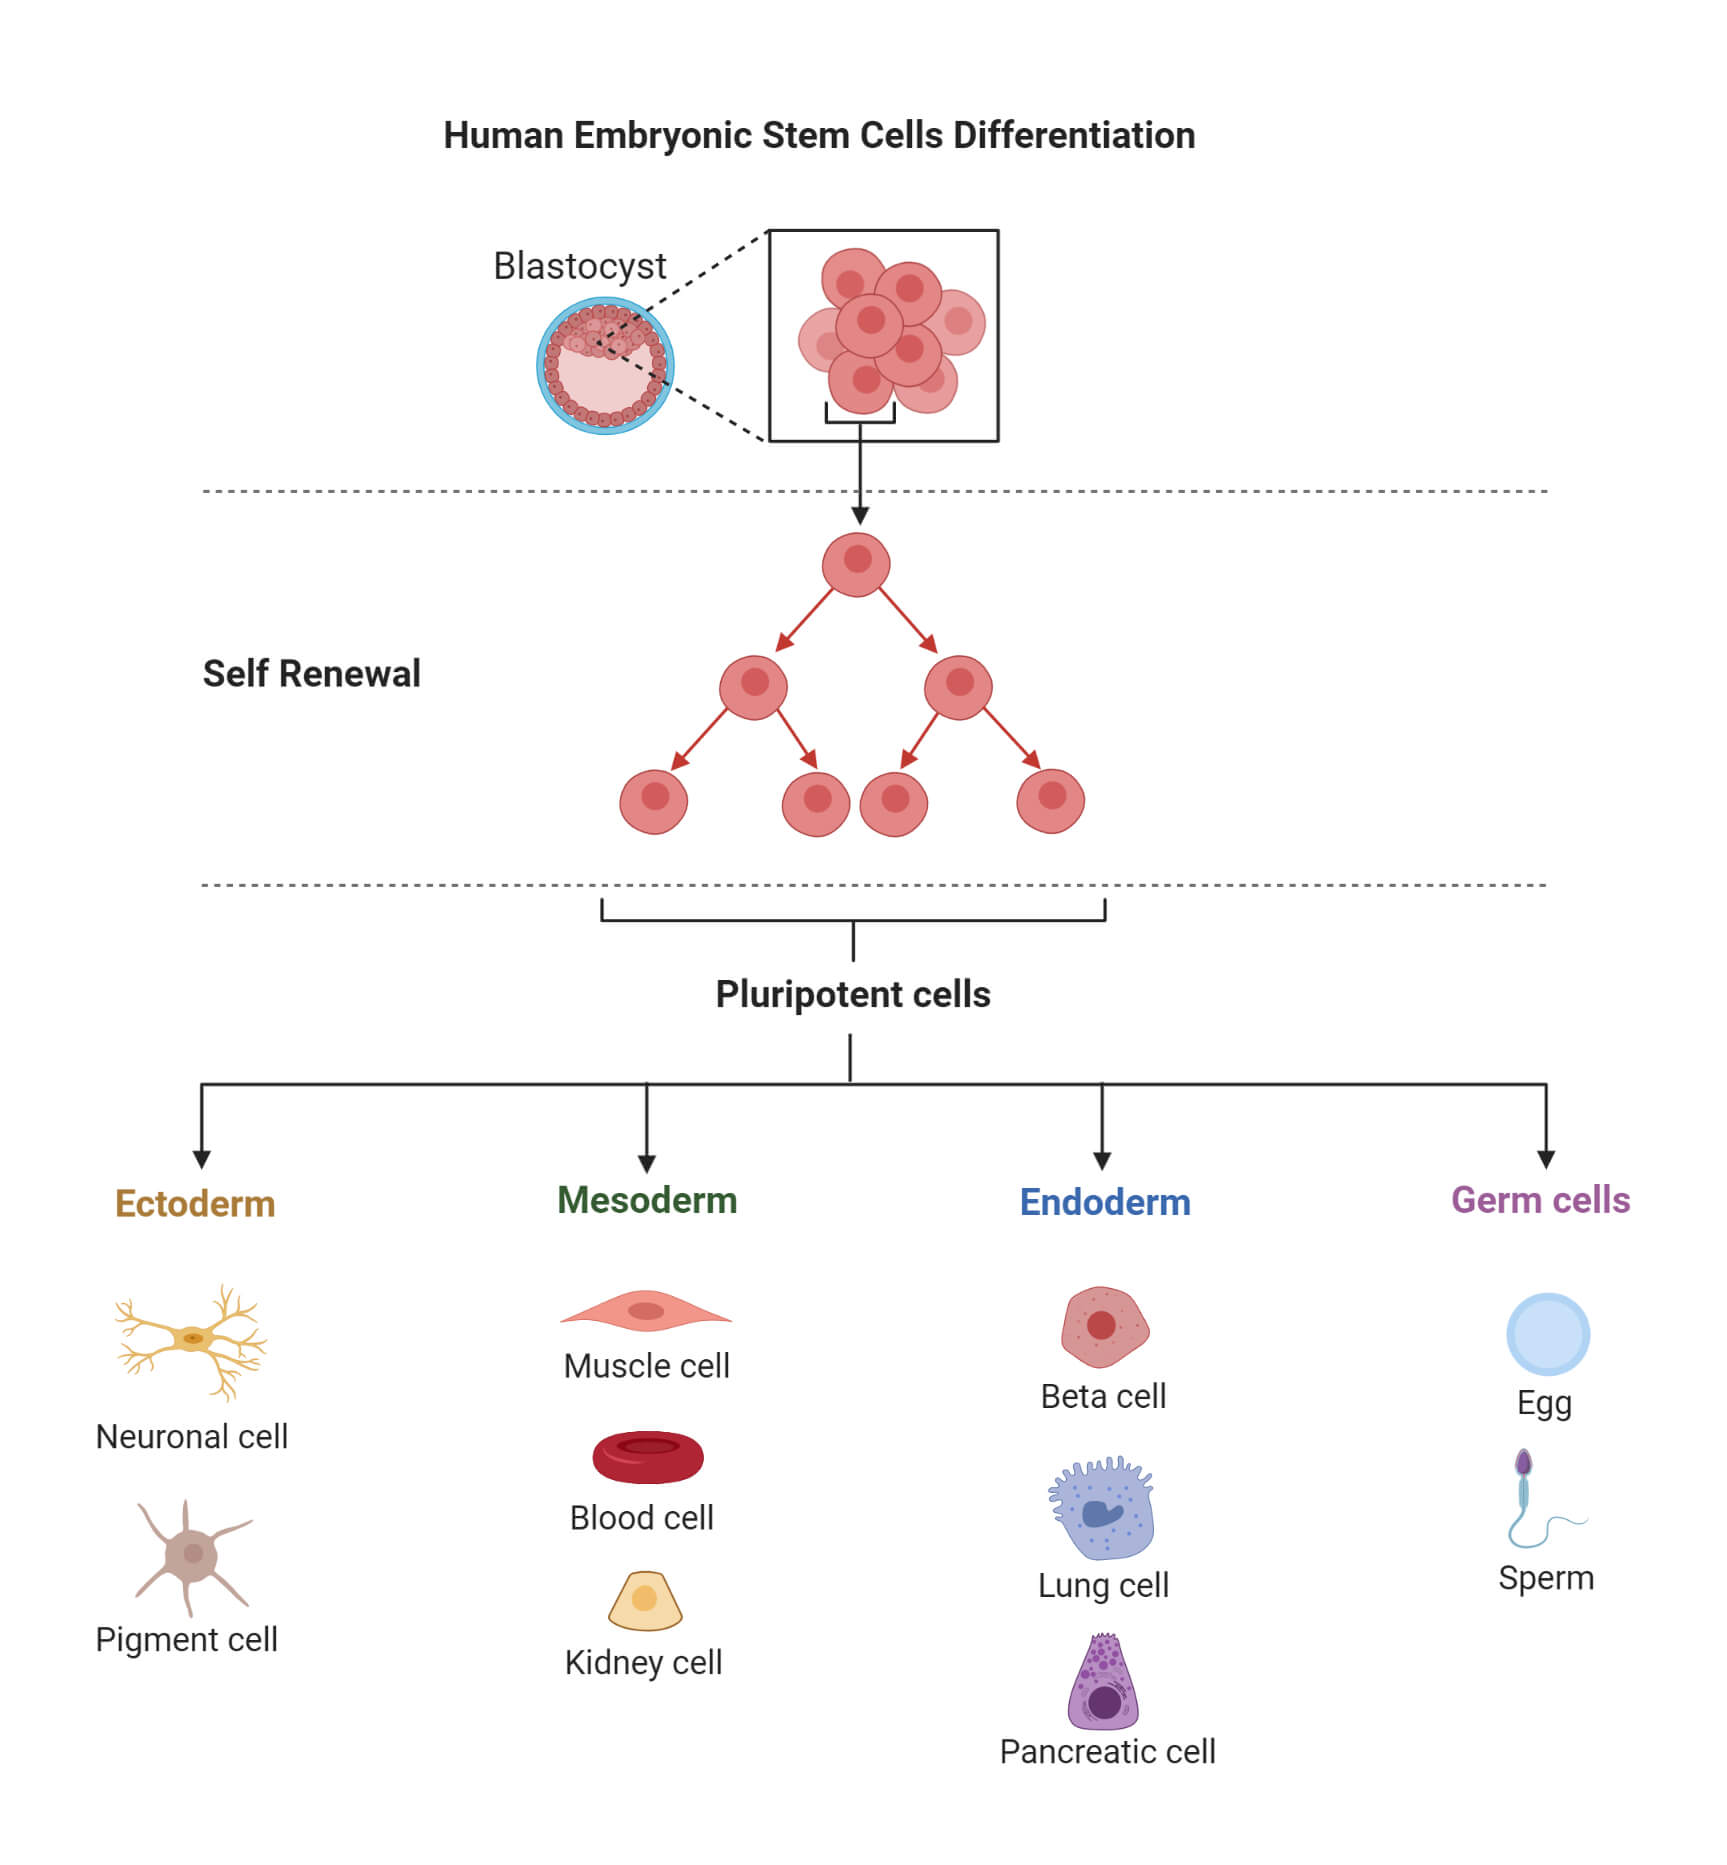 Human Embryonic Stem Cells Differentiation